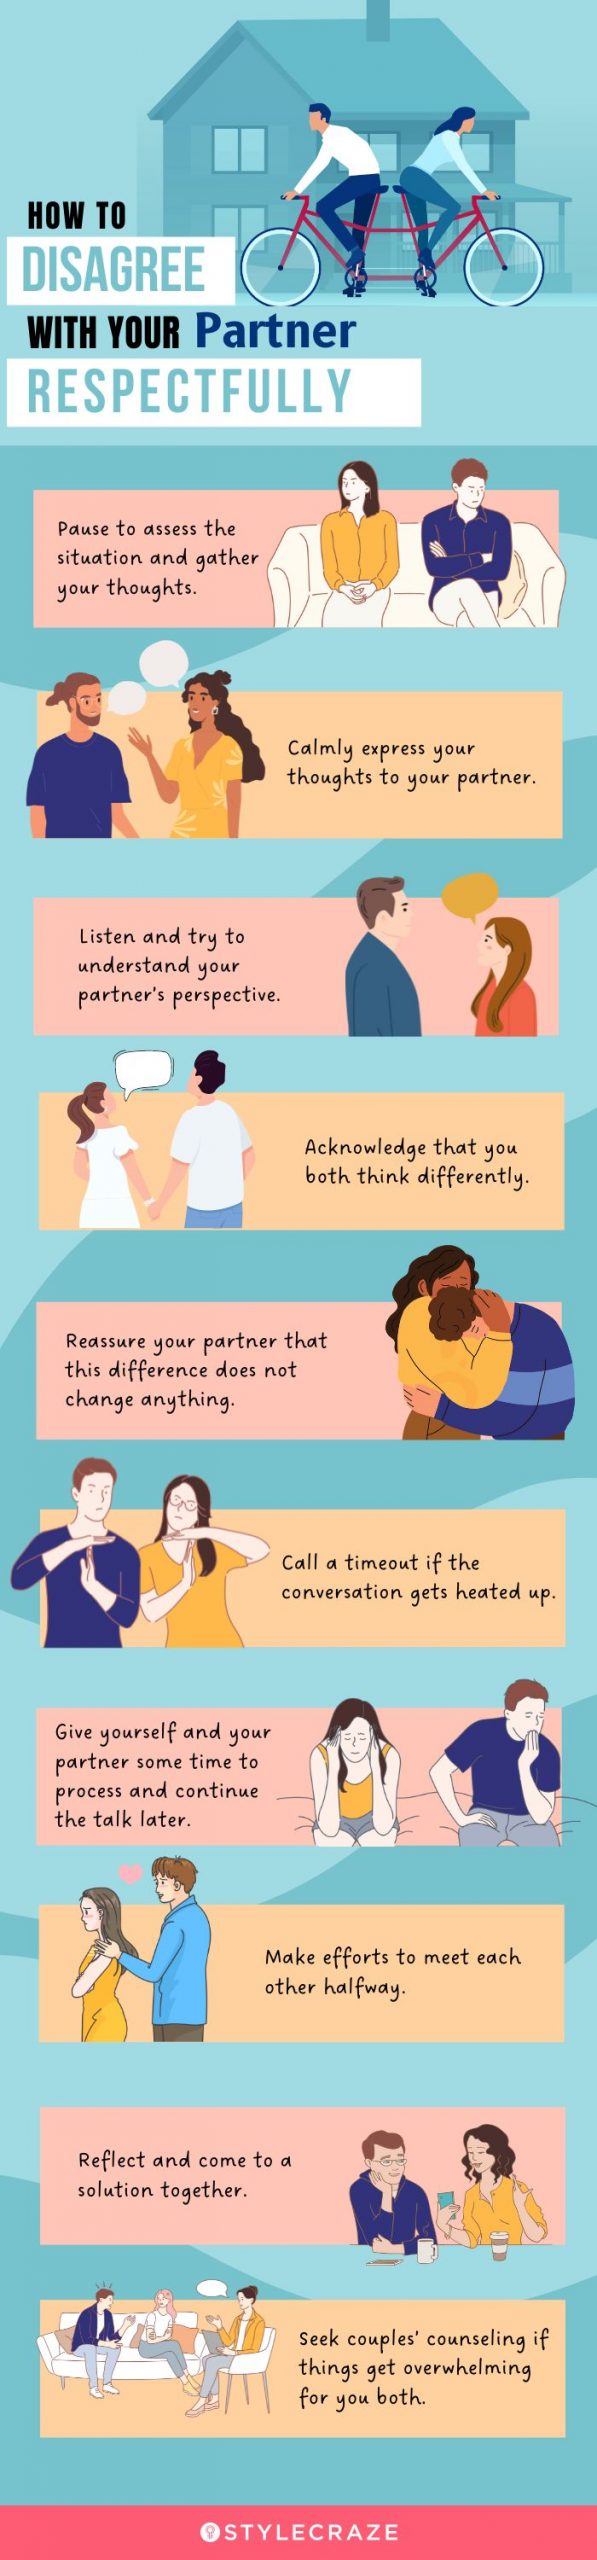 how to disagree with your partner respectfully (infographic)